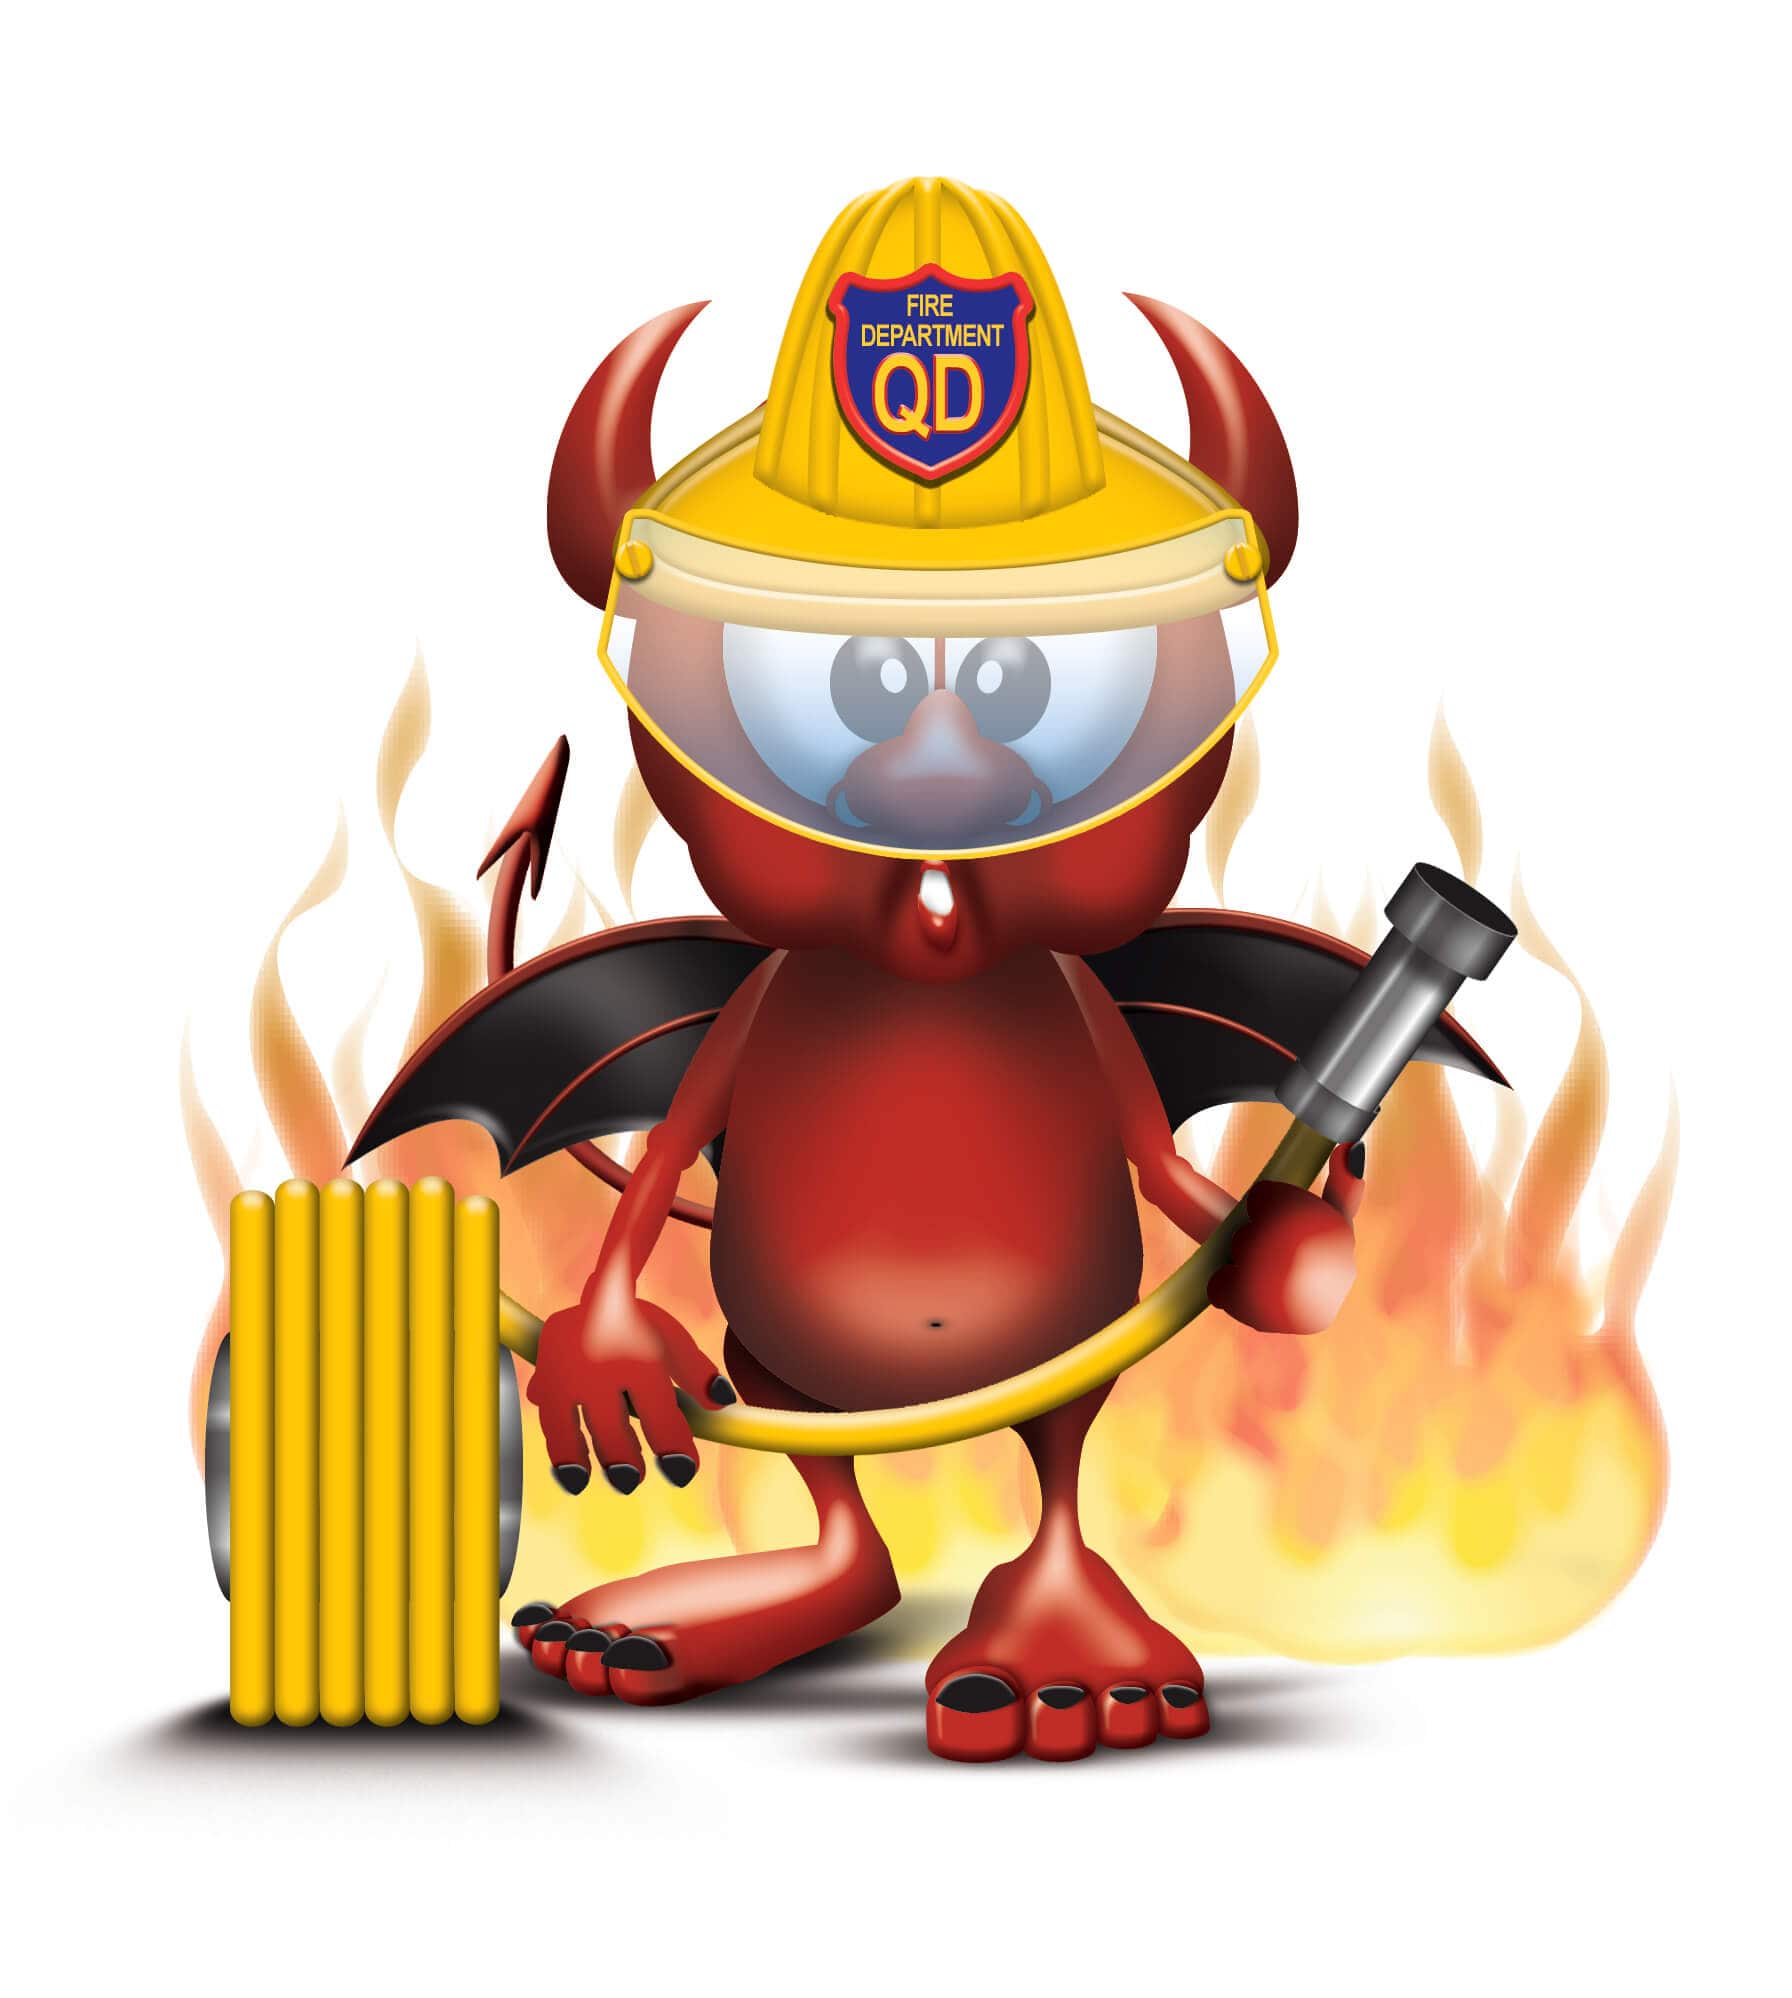 Quote devil mascot with a firehose